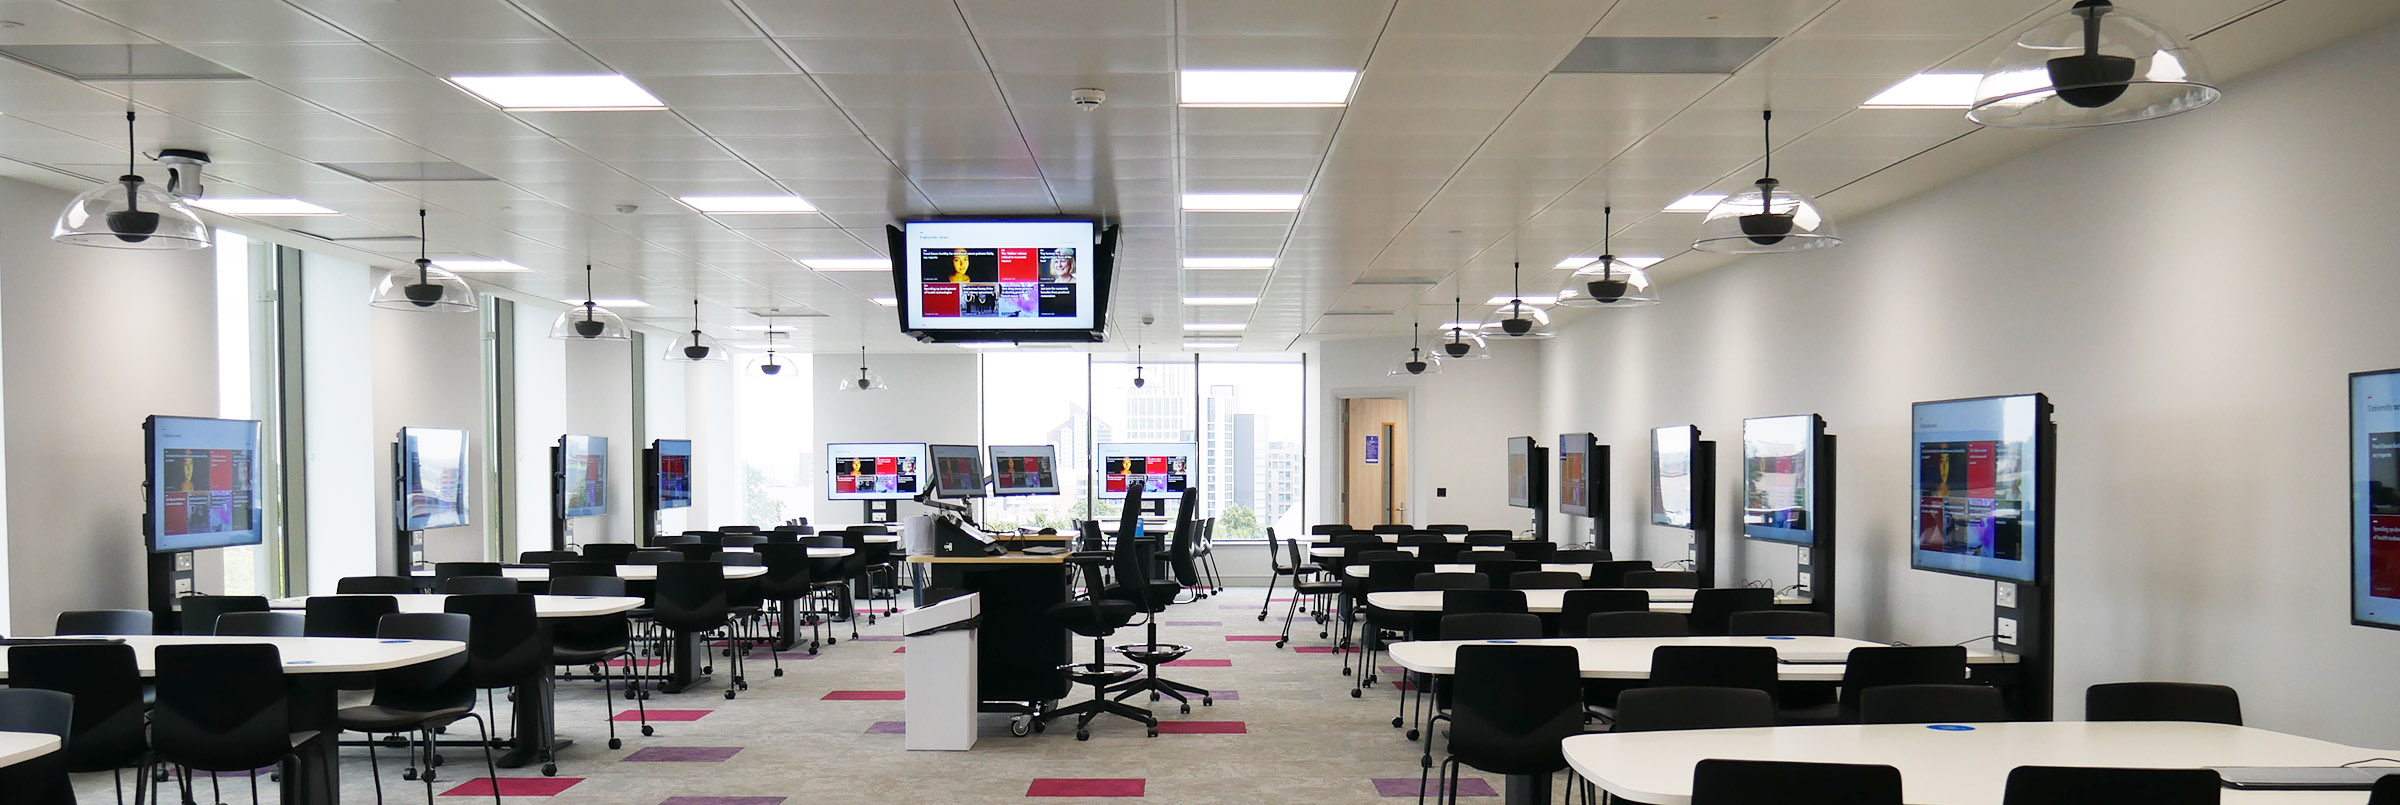 Microphones, screens and desks in a learning environment providing audio solutions